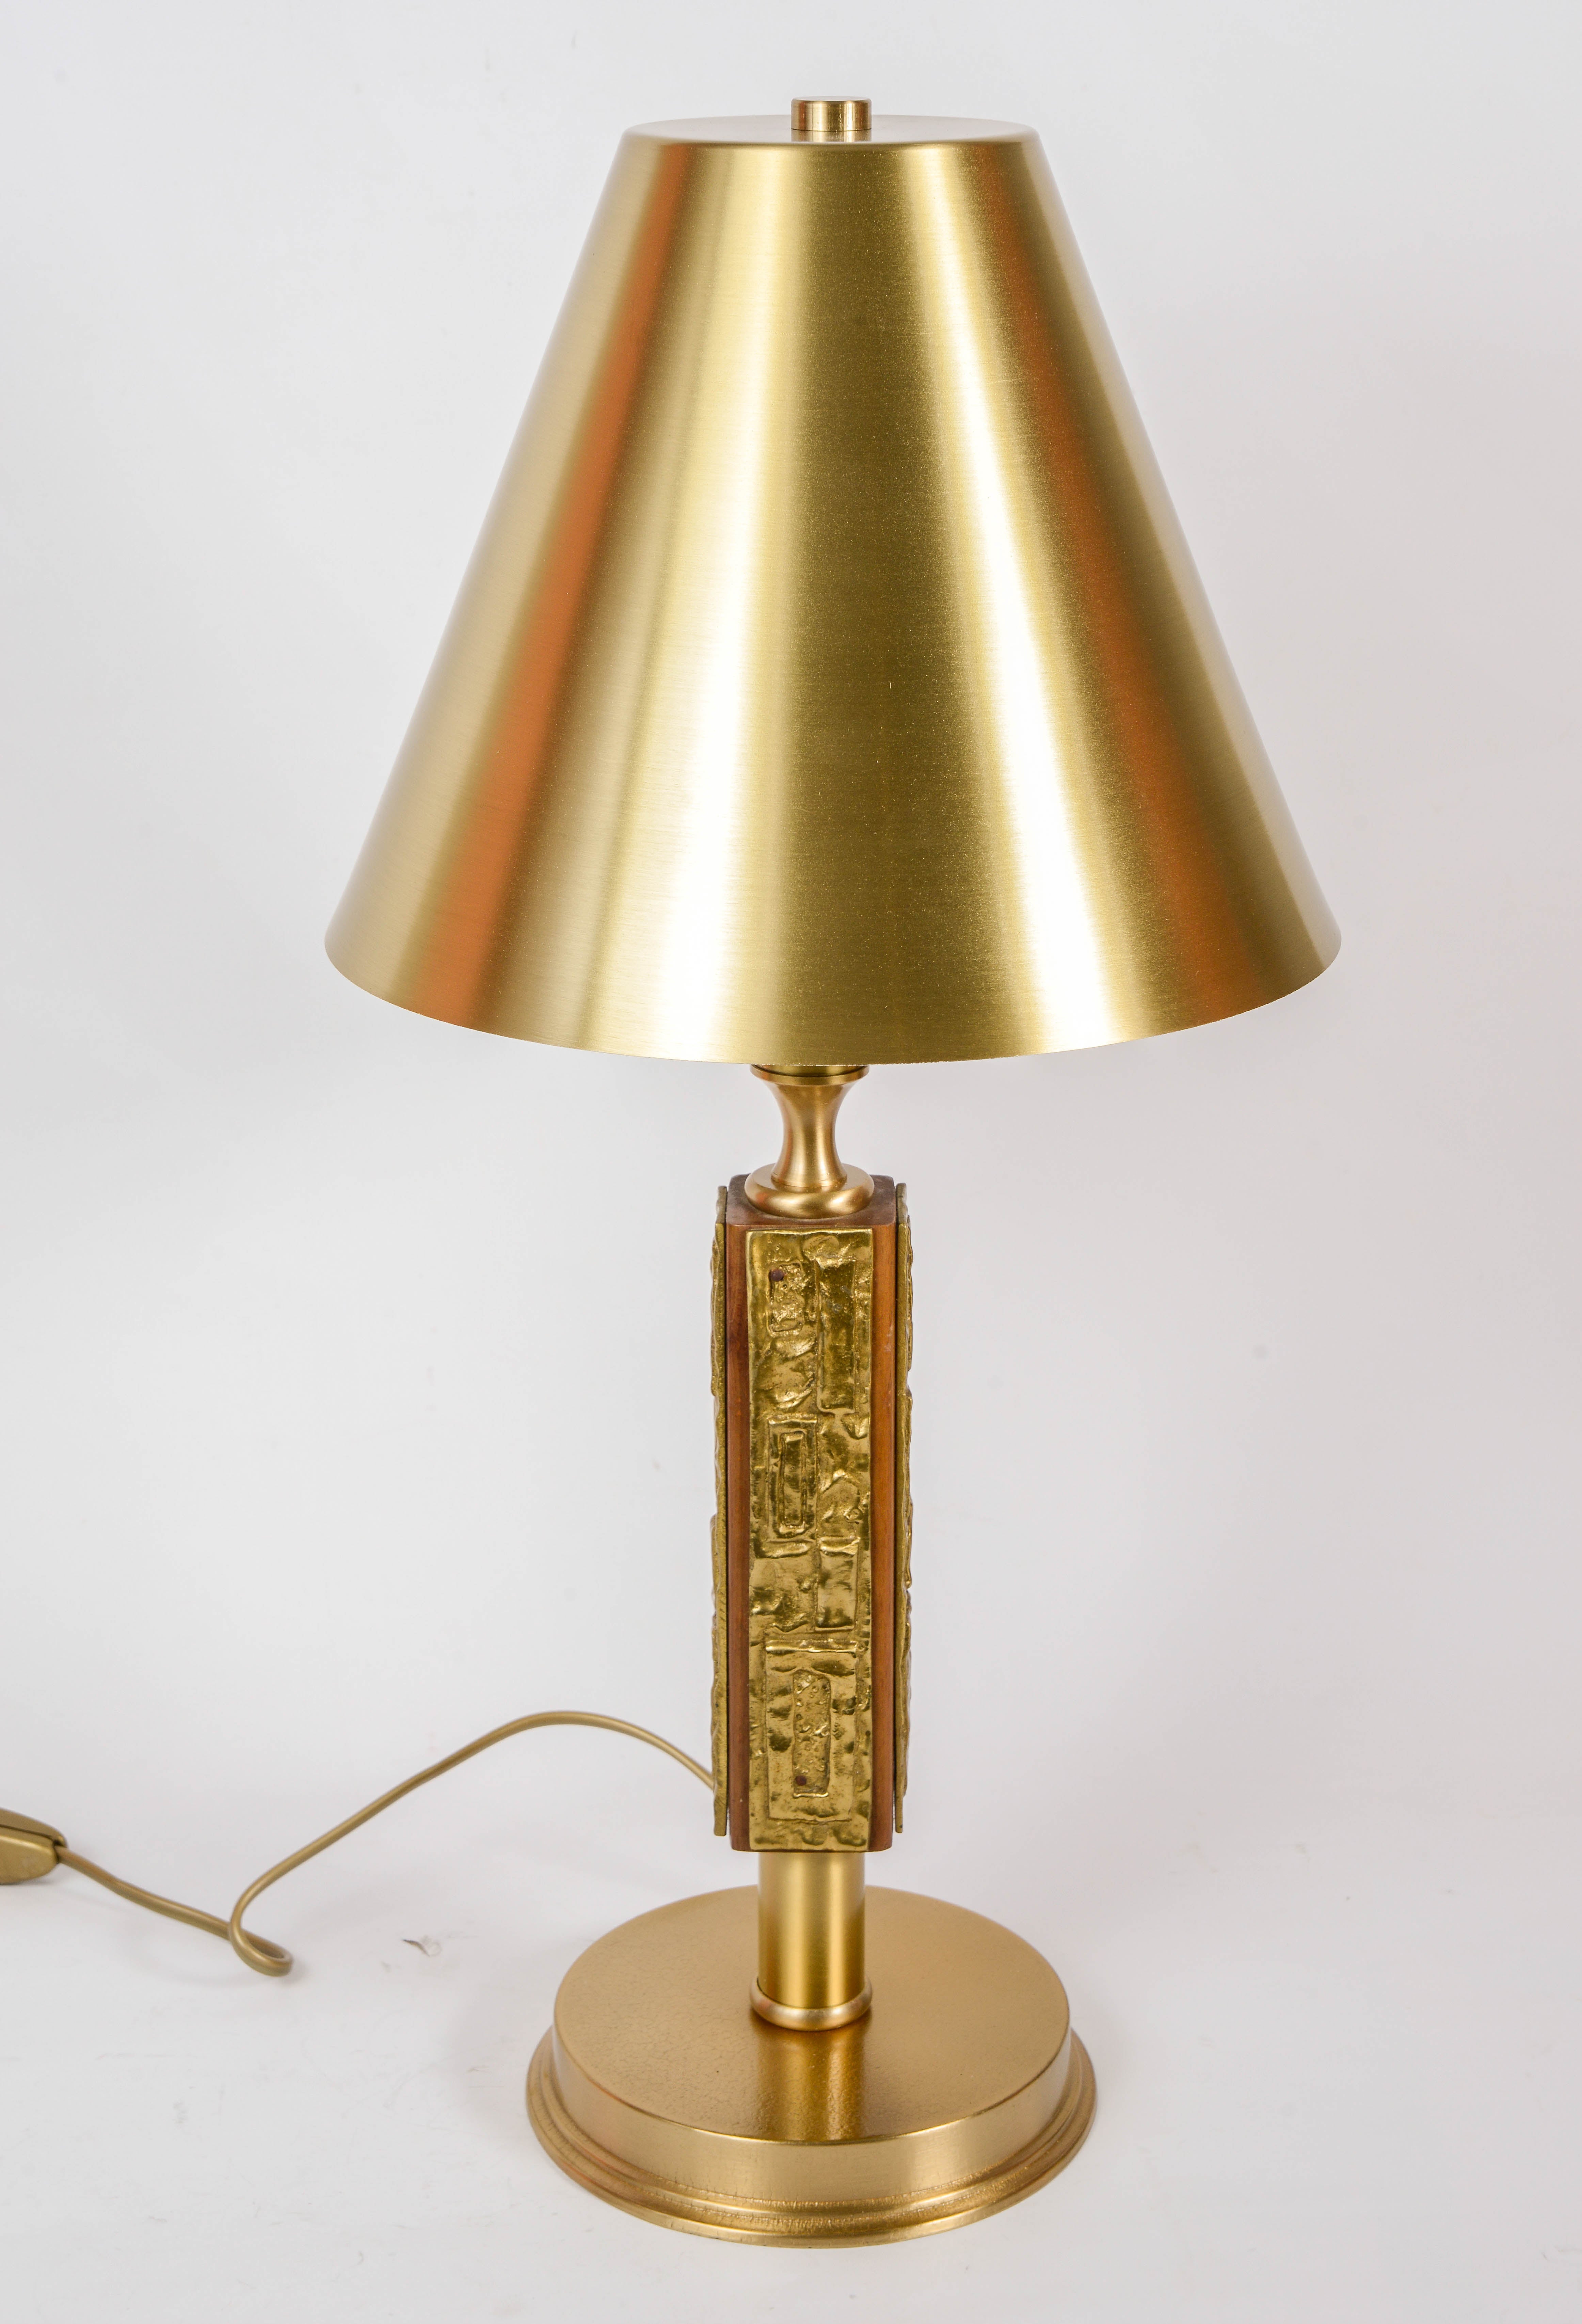 Pair of lamps by Angelo Brotto.